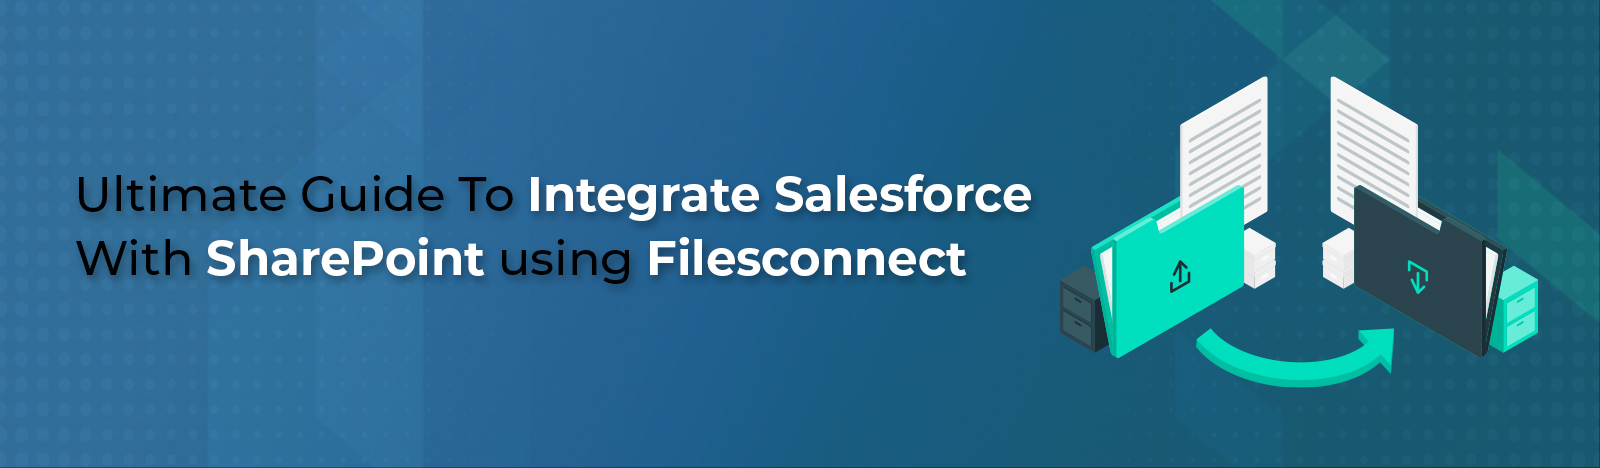 Ultimate Guide To Integrate Salesforce With SharePoint using Filesconnect